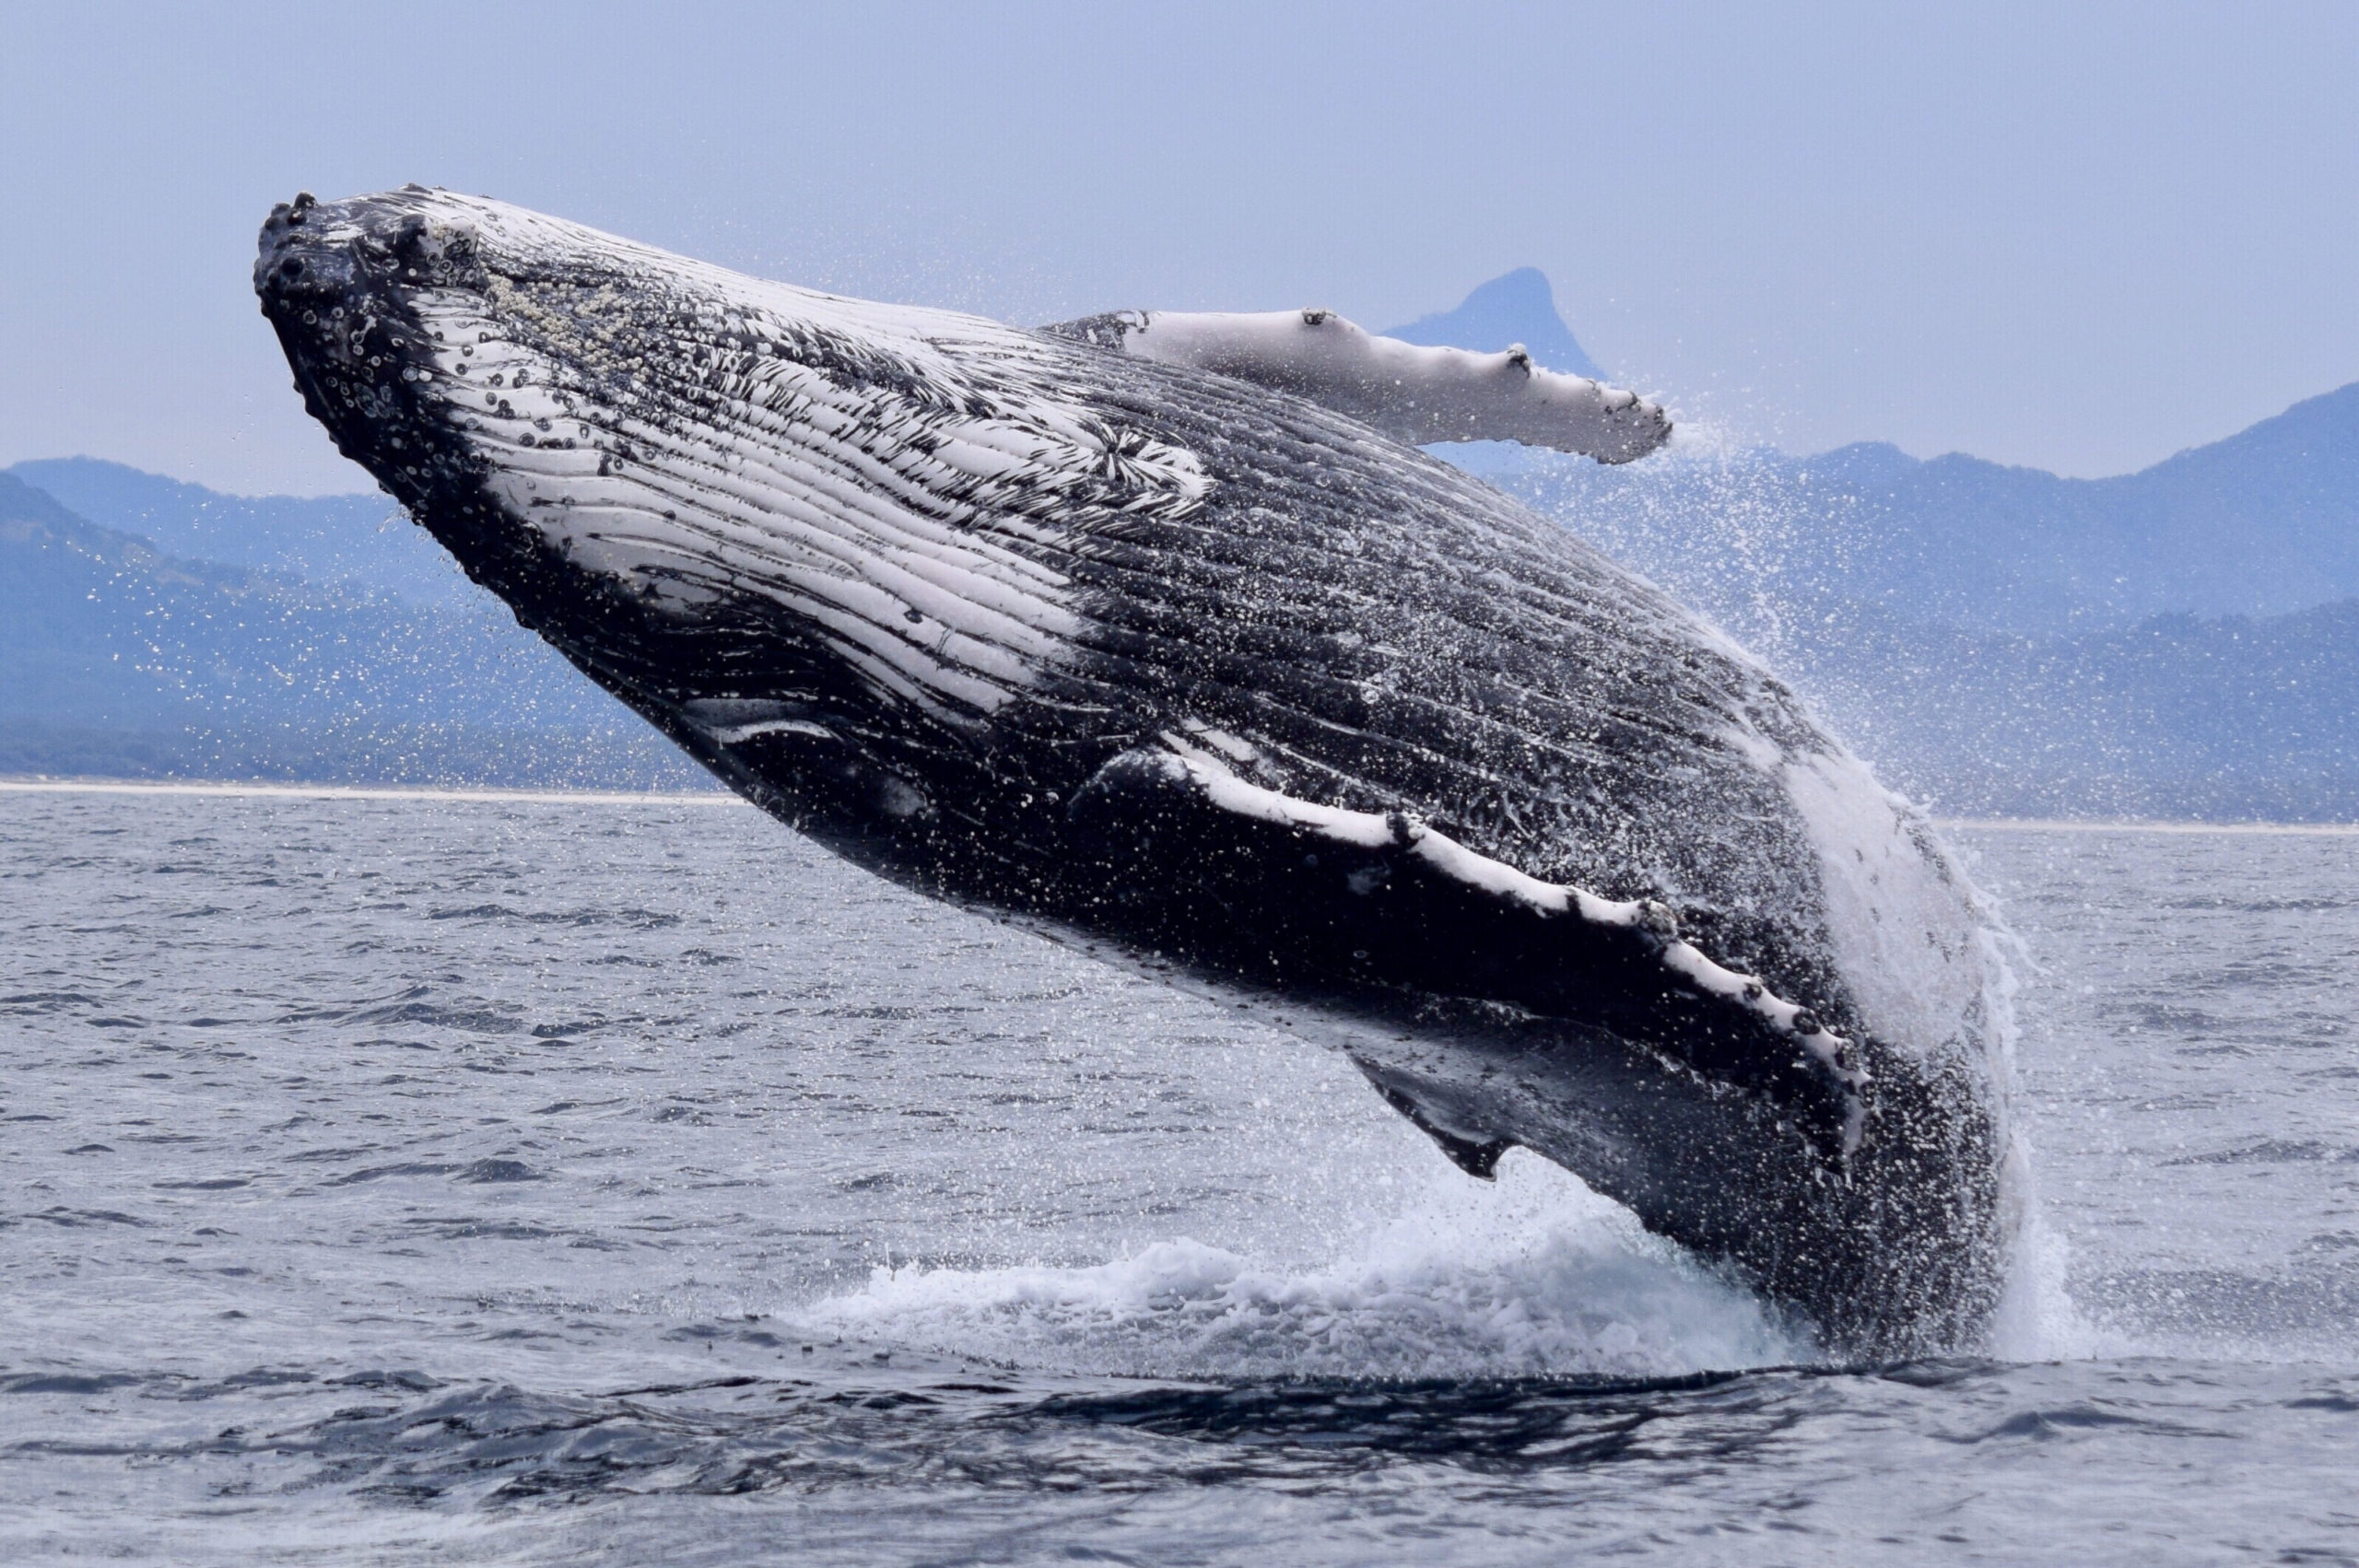 2.5hr Whale Watching Cruise